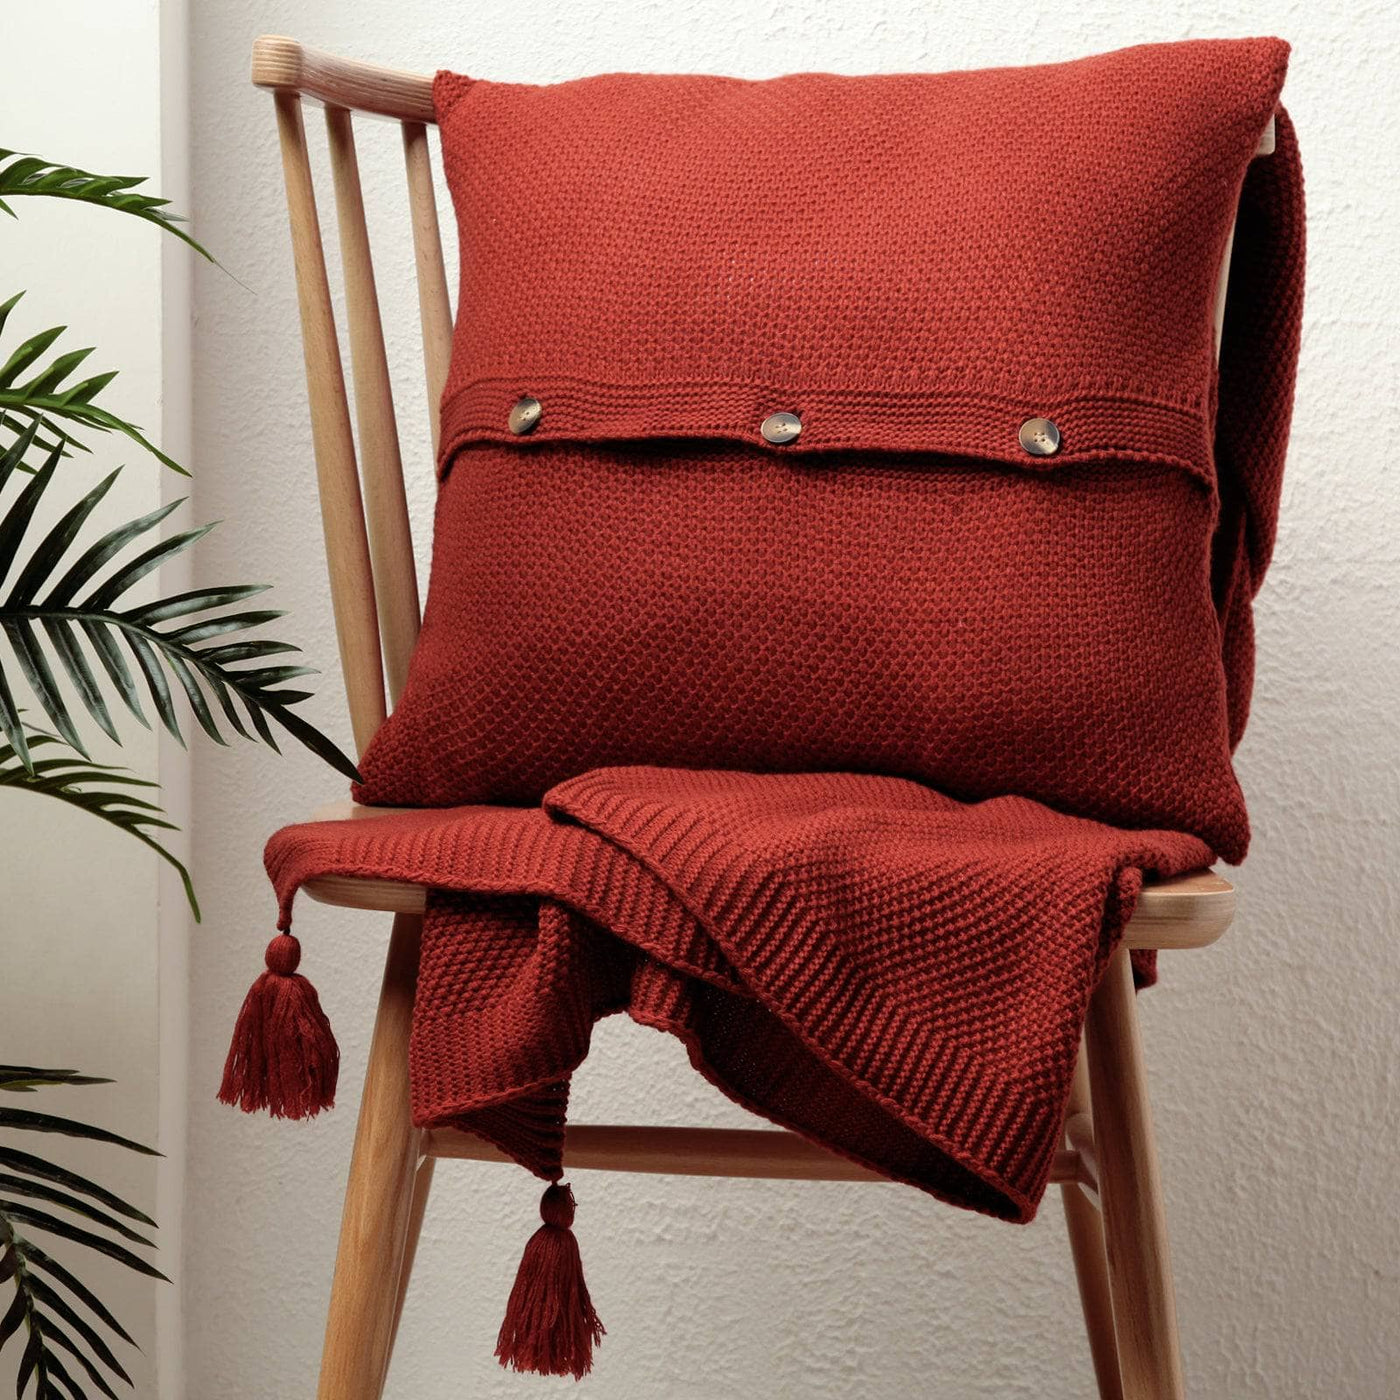 Benjamin Waffle Knitted Cushion Cover, Red, 45x45 cm 5